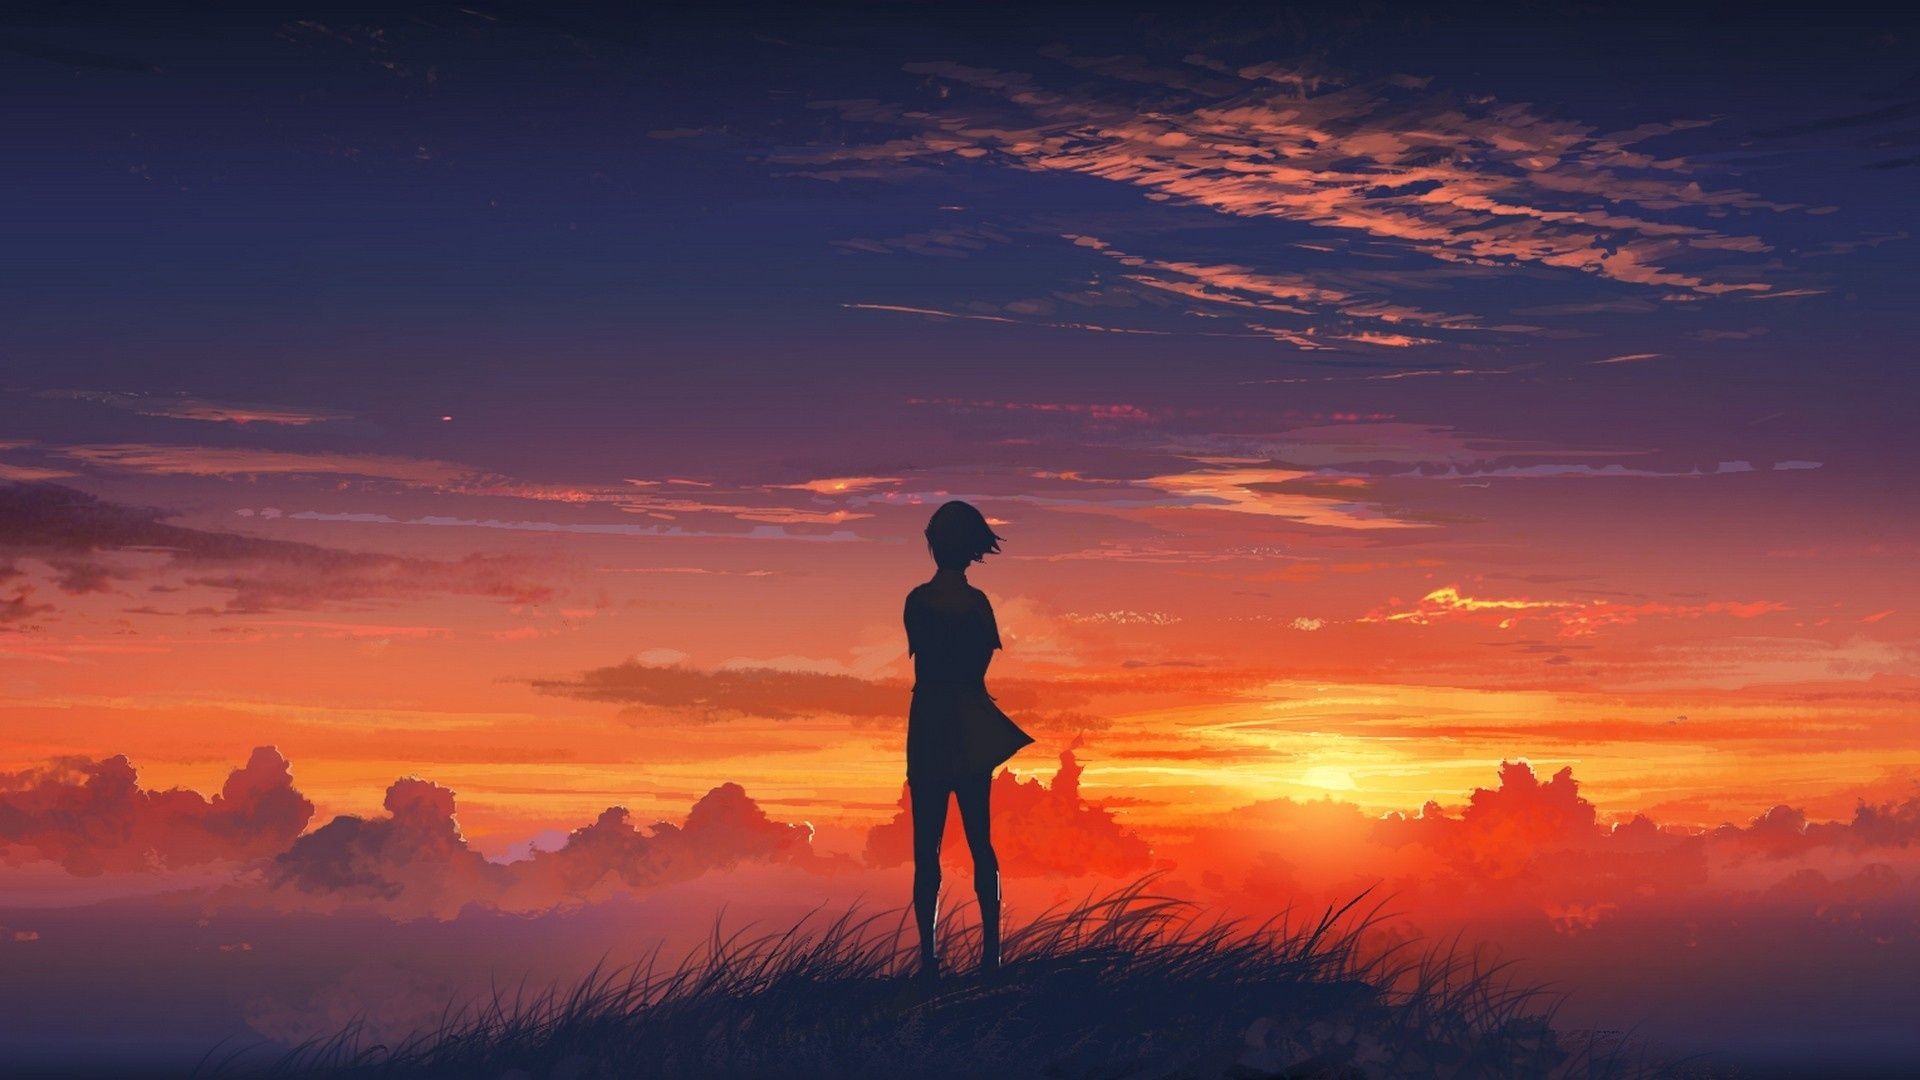 Anime Silhouette Wallpaper Free Anime Silhouette Background